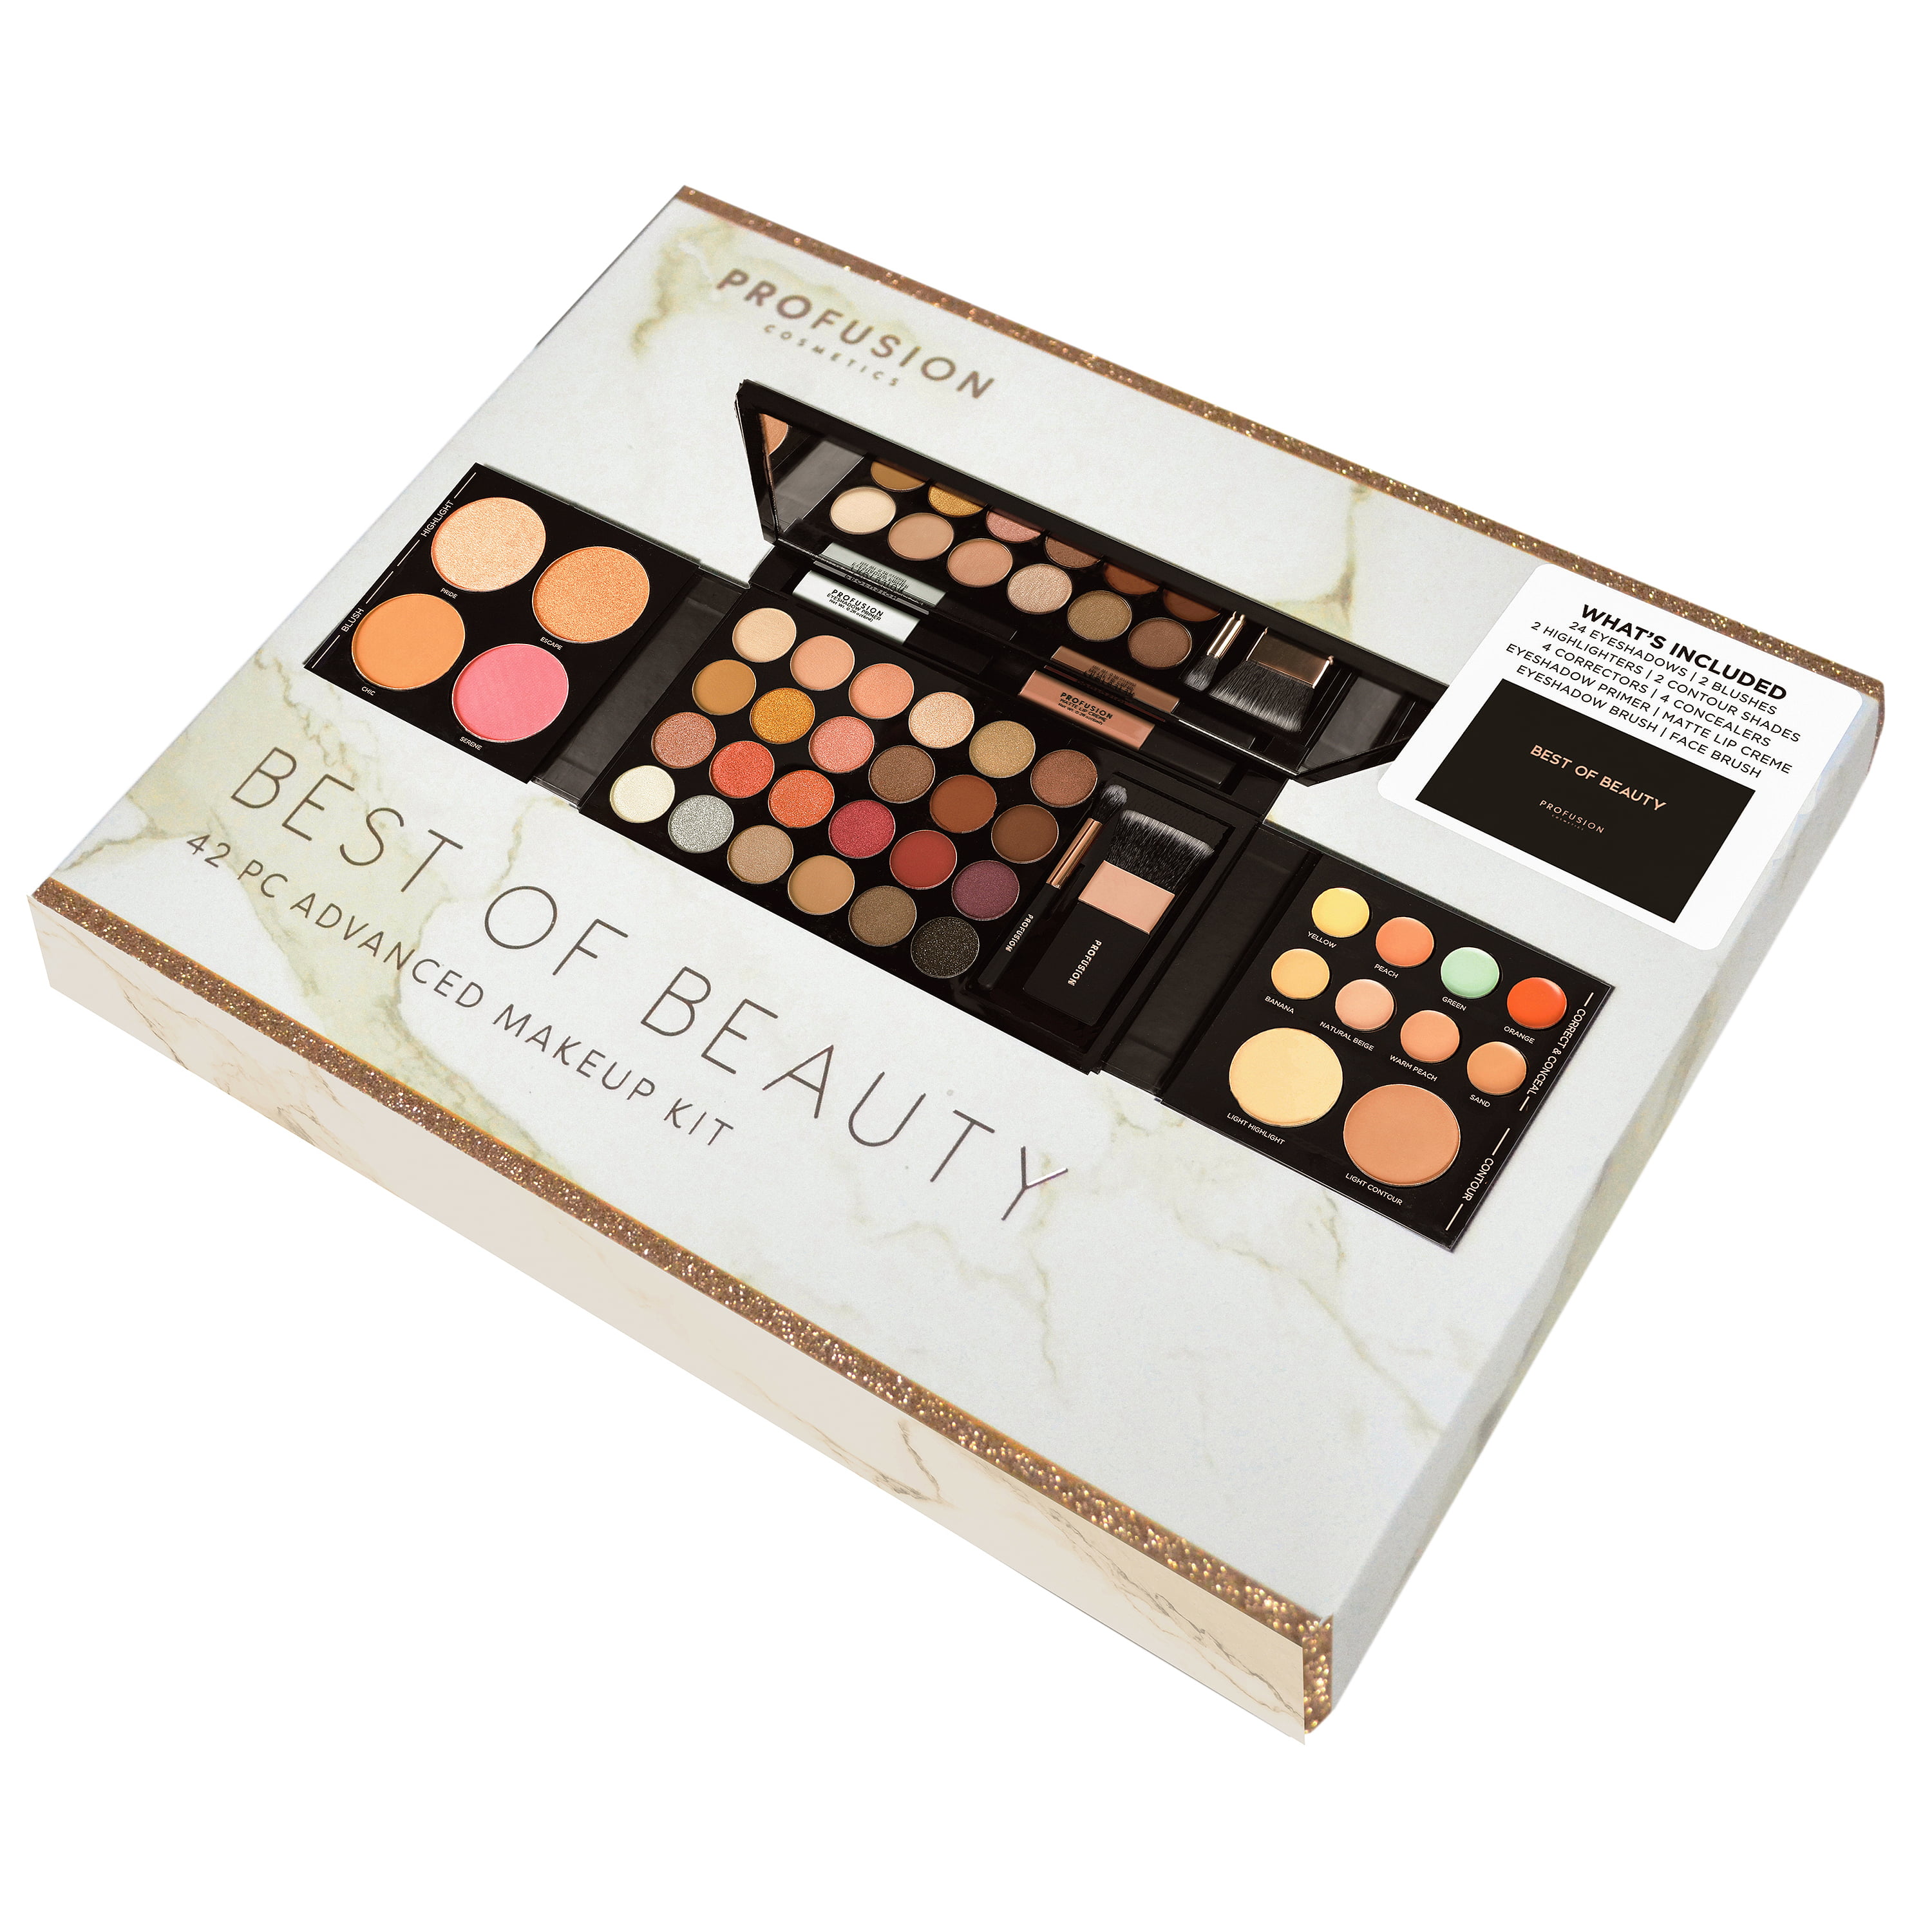 Kit Completo Maquillaje Profesional - Epic Beauty Pro